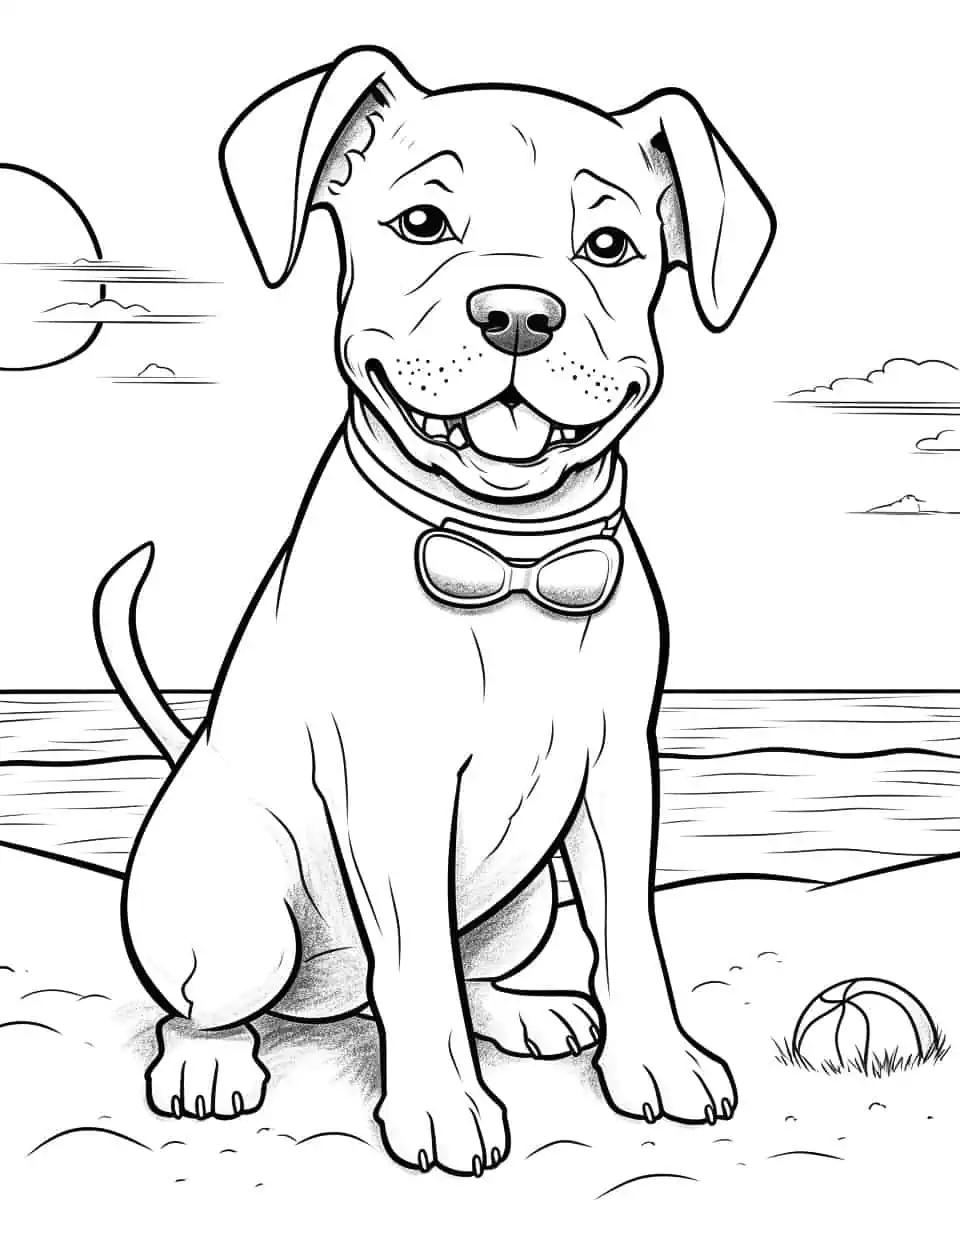 Pitbull at the Beach Dog Coloring Page - A Pitbull playing with a beach ball on a sunny beach.